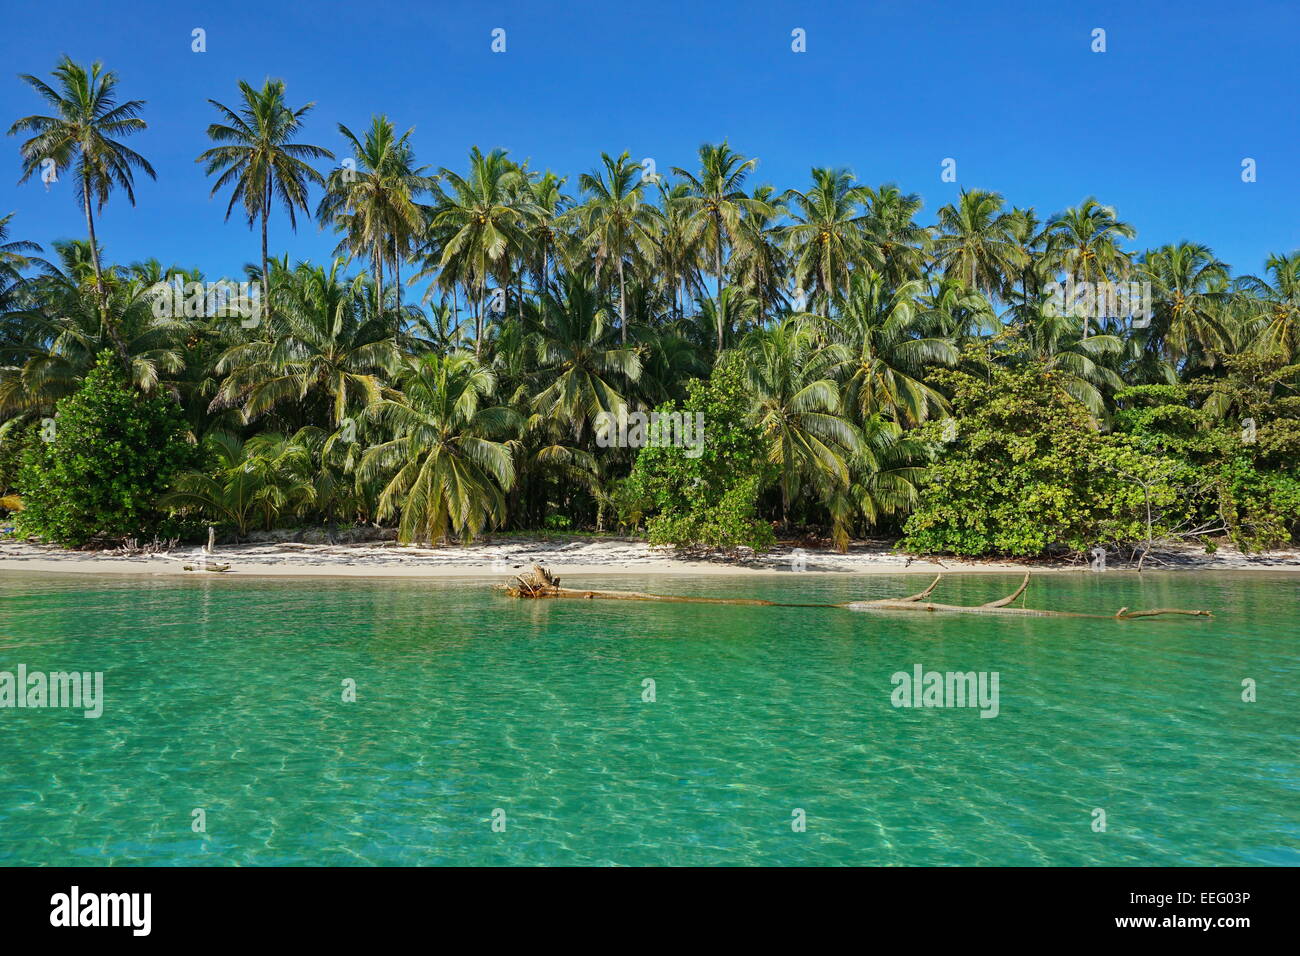 Sandy Caribbean shore with lush tropical vegetation, viewed from the sea Stock Photo